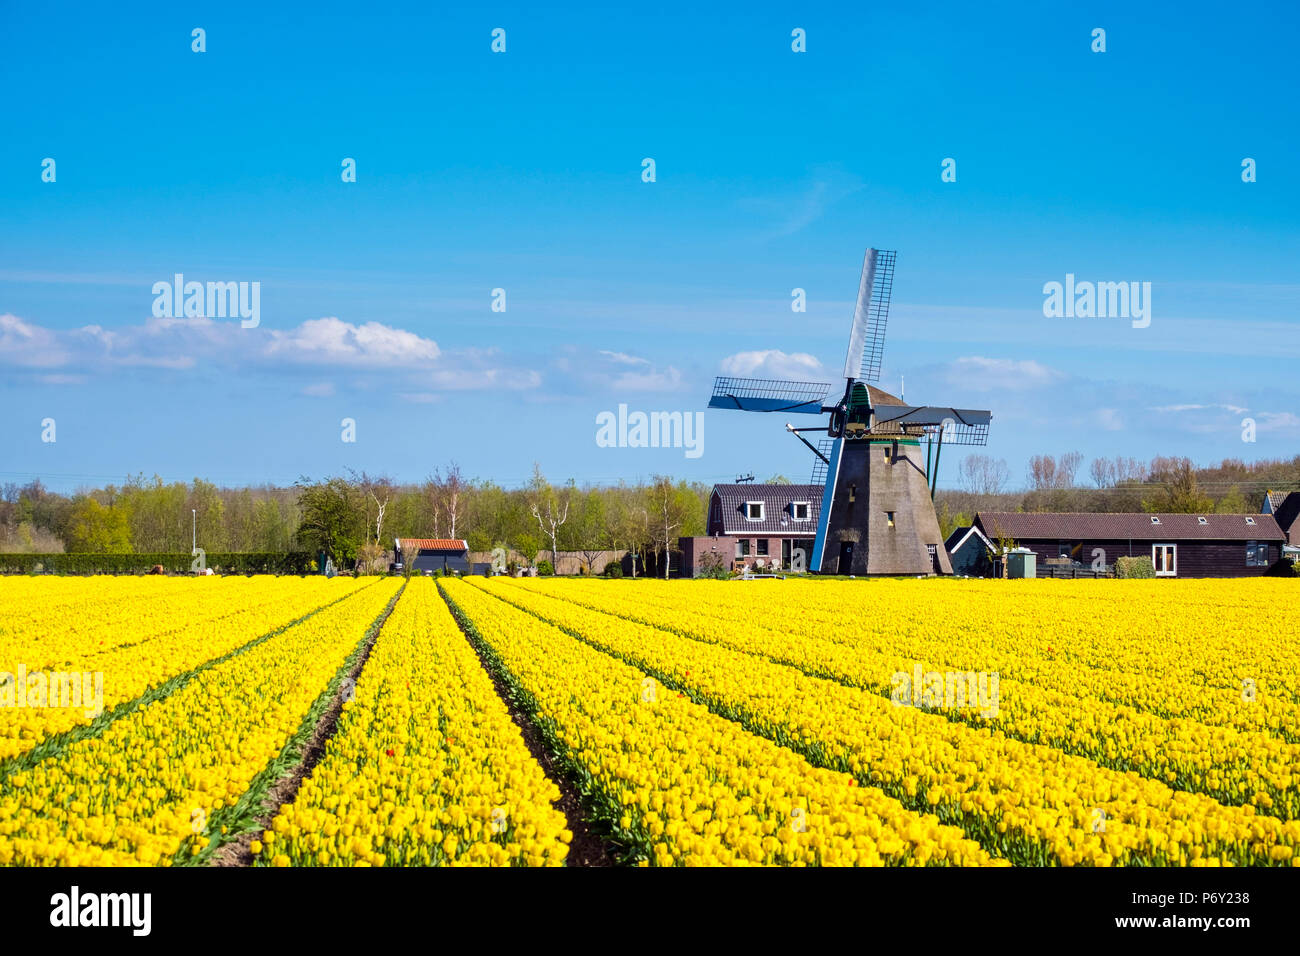 Netherlands, South Holland, Nordwijkerhout. Yellow Dutch tulip filed, tulips in front of a windmill in early spring. Stock Photo